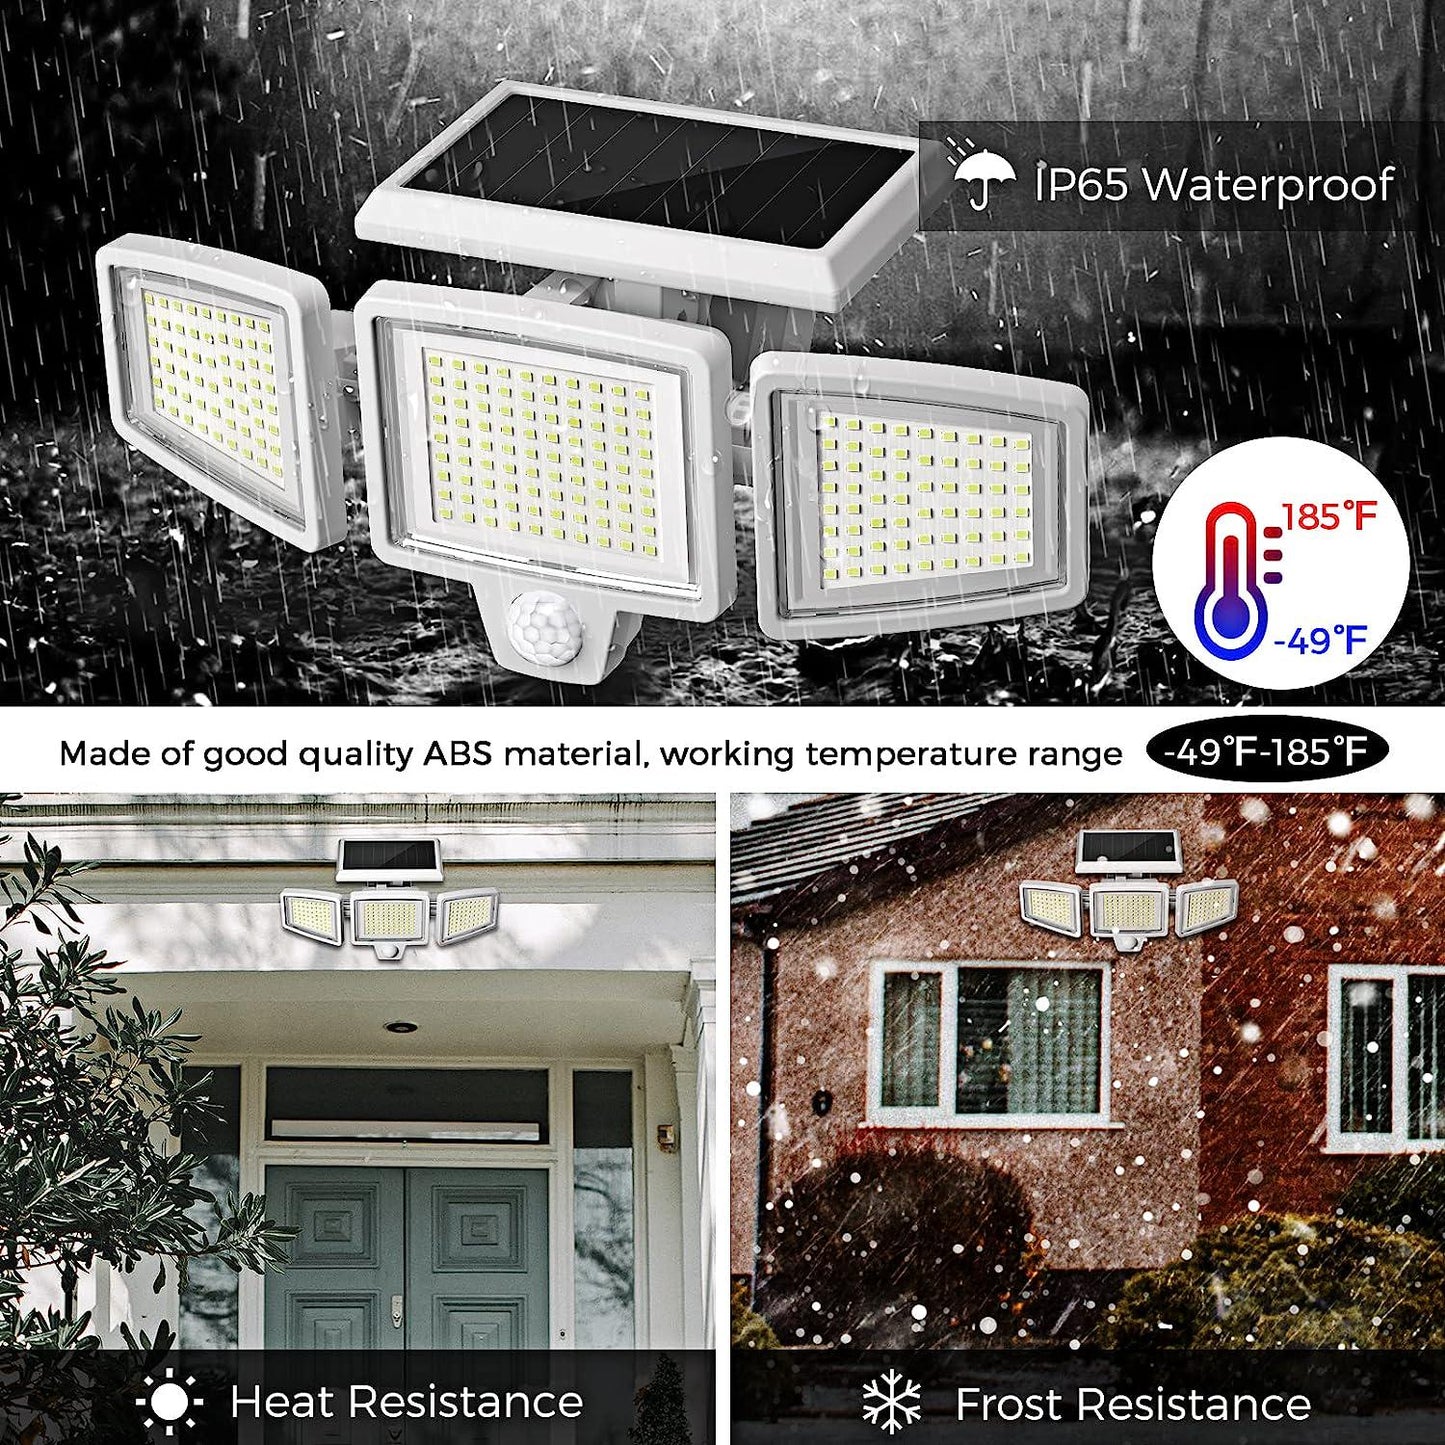 KERNOWO Solar Lights Outdoor, 210 LED 2500LM Solar Flood Security Lights with 25FT Motion Sensor IP65 Waterproof 3 Heads Spot Flood Wall Lights for Porch Garage Yard Entryways Patio (White, 2pcs)